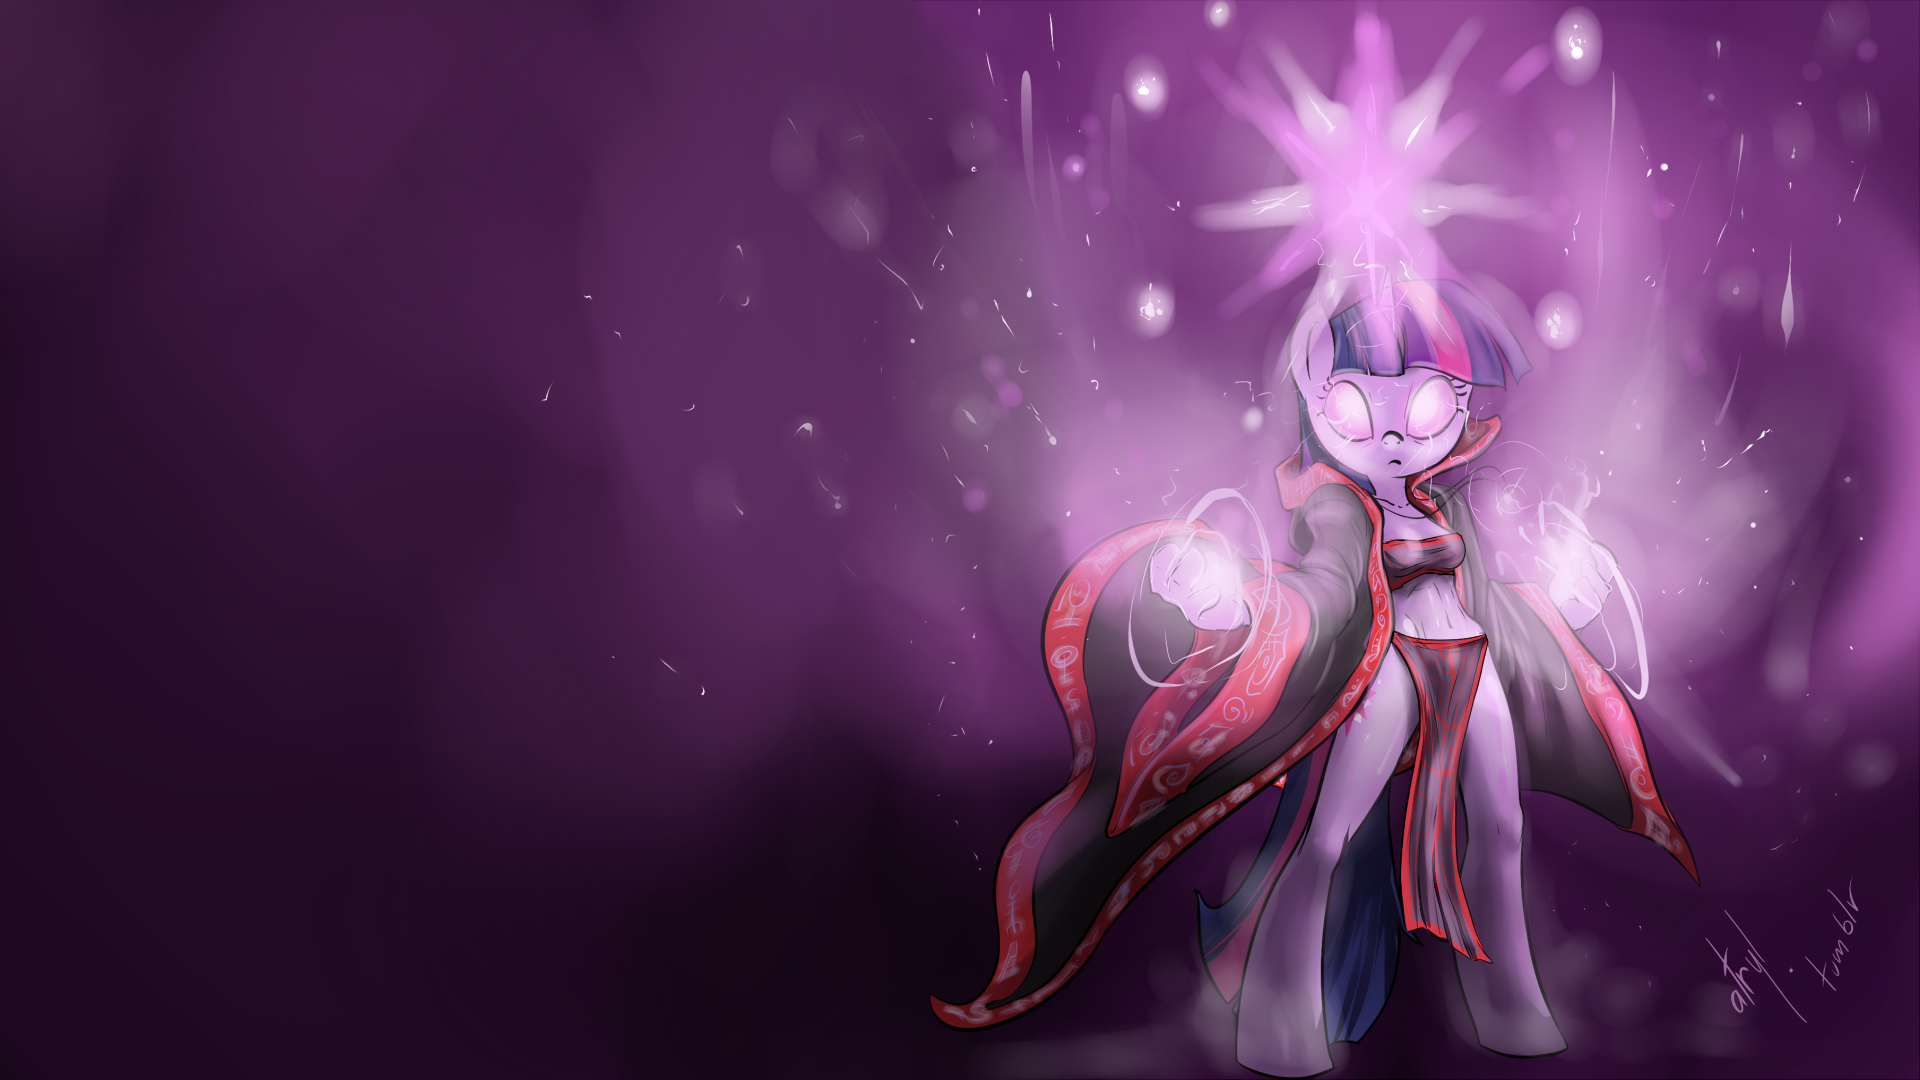 Twilight Mage Wallpaper by atryl